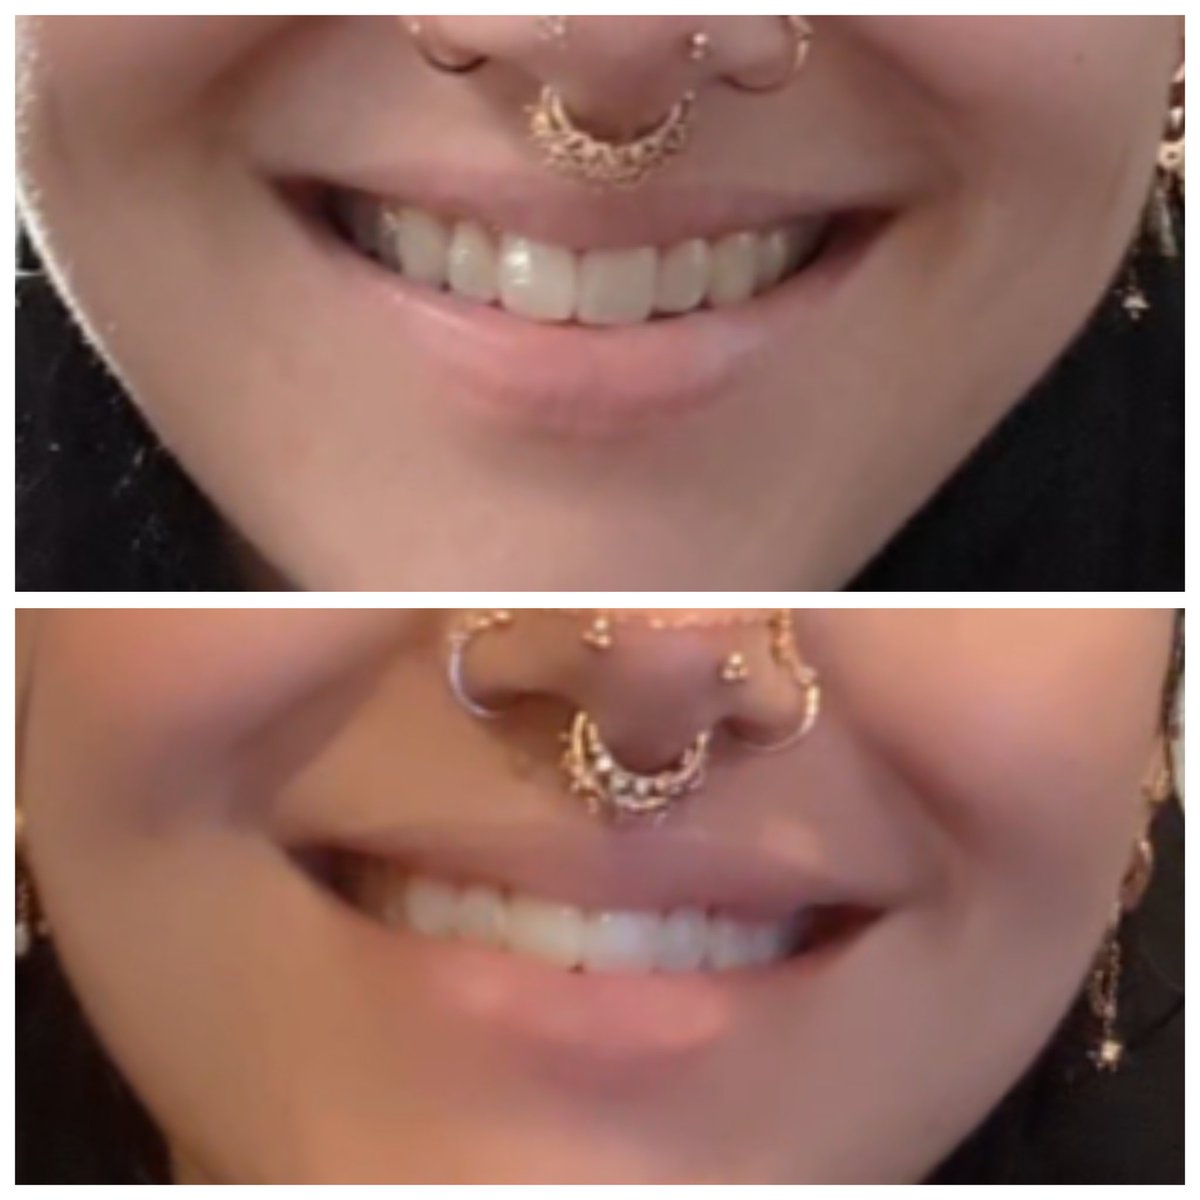 I got a lip flip 11 days ago and I'm soooo happy with the result. My top lip is like double the size it was before when I smile. I never had a gummy smile but it was pretty toothy and I feel like it's way more balanced now